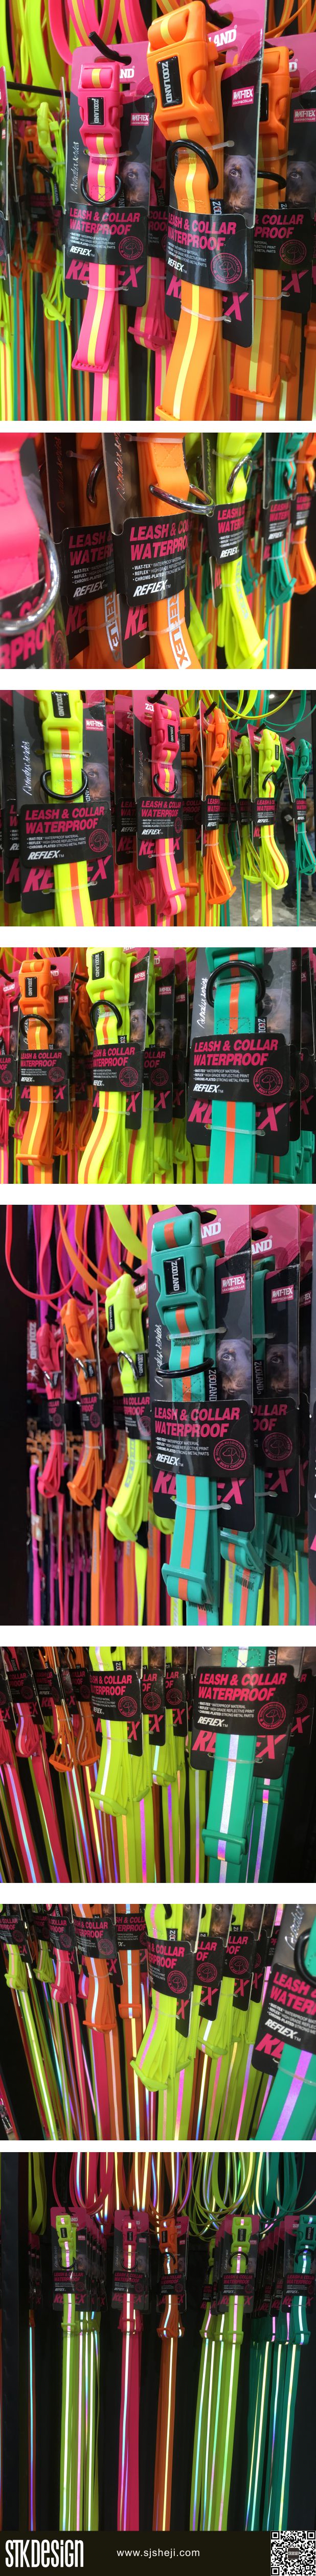 ZOOLAND Leash&collar Packaging